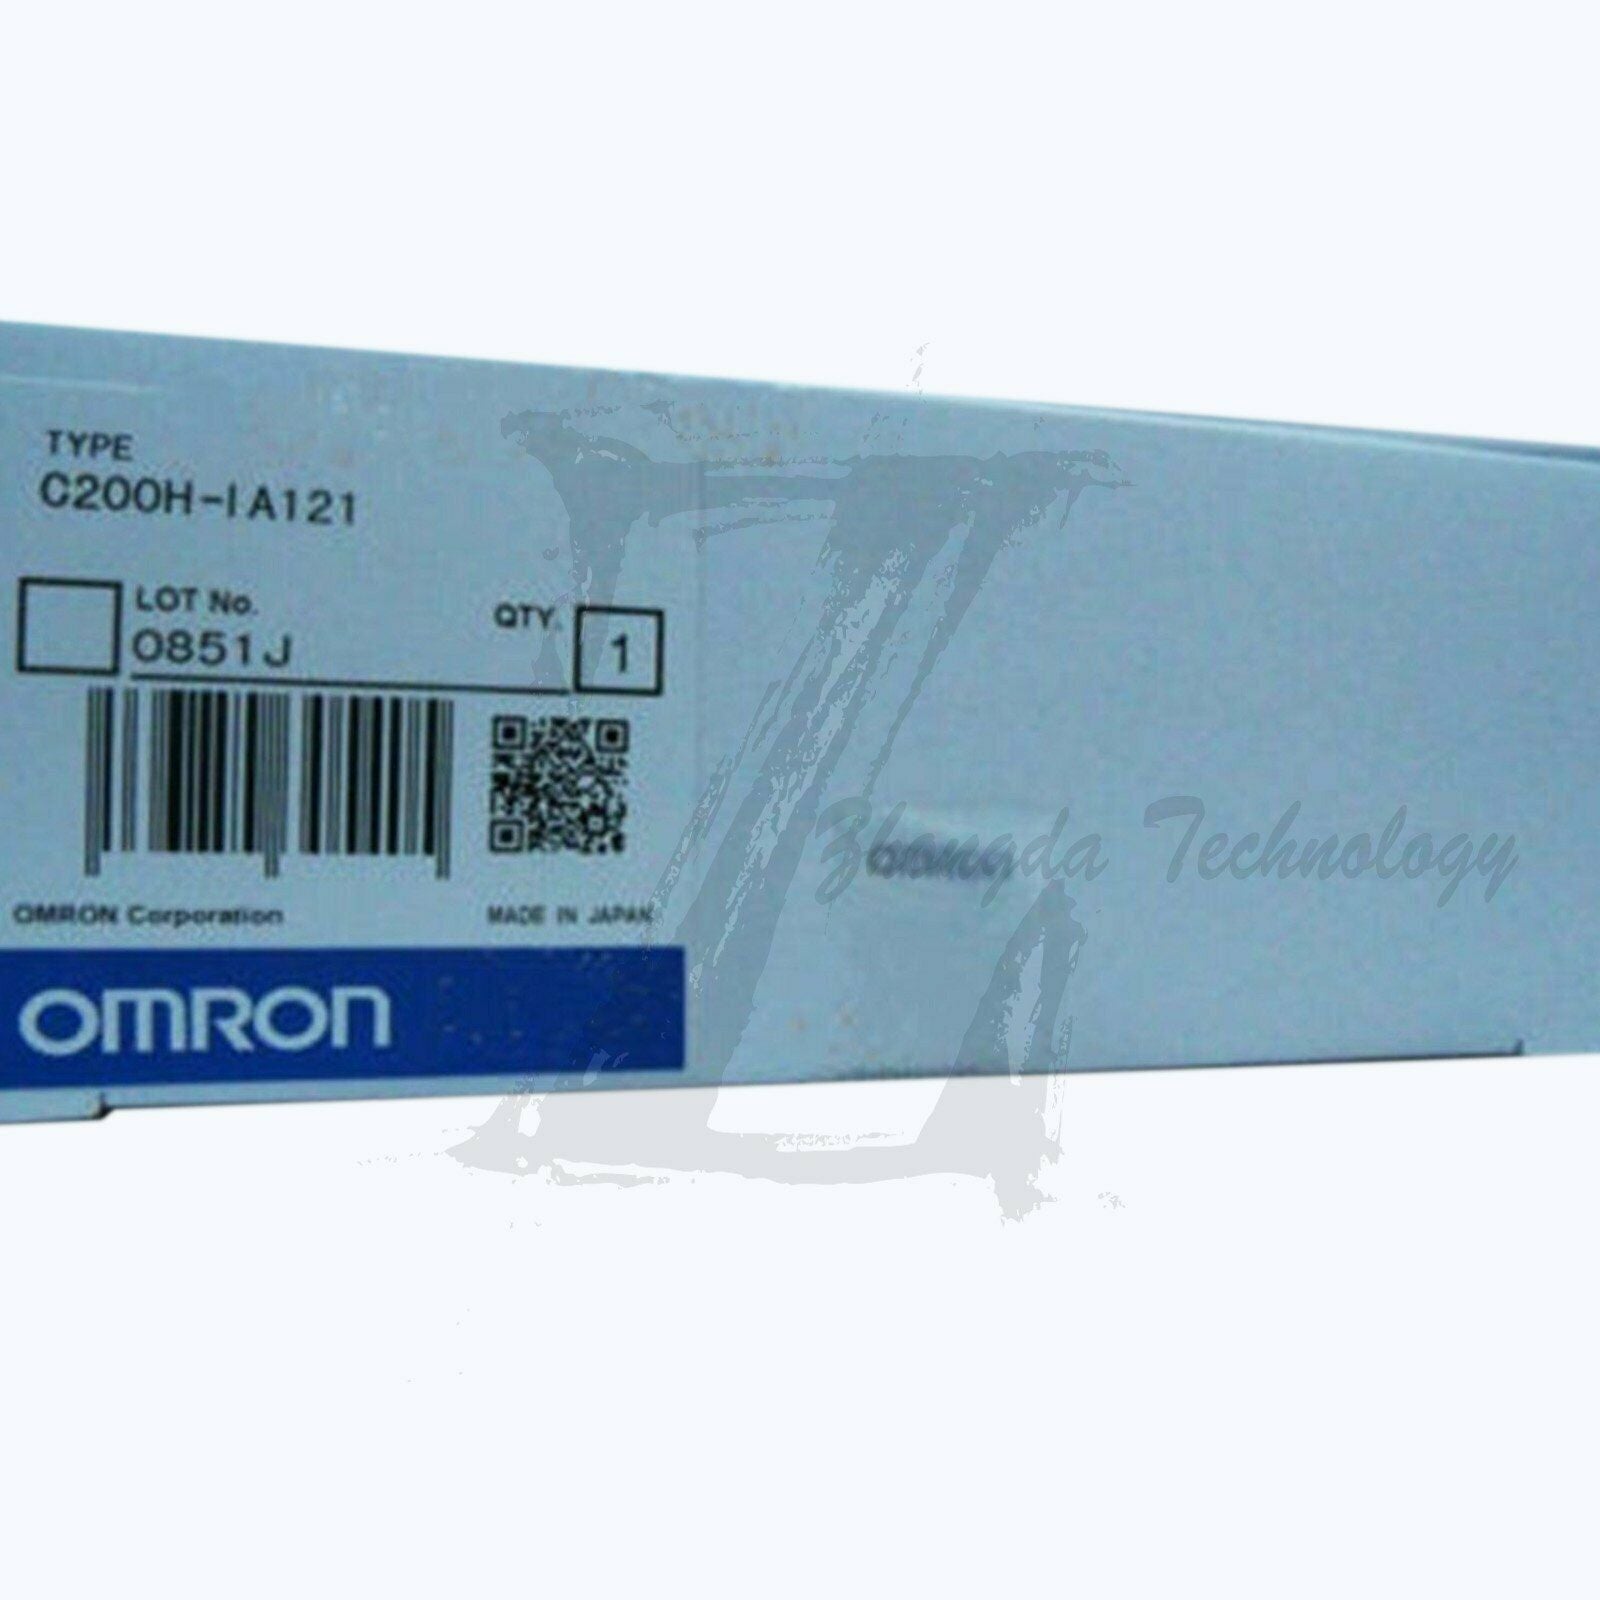 1pc new Omron C200H-IA121 module one year warranty KOEED 201-500, 90%, import_2020_10_10_031751, Omron, Other